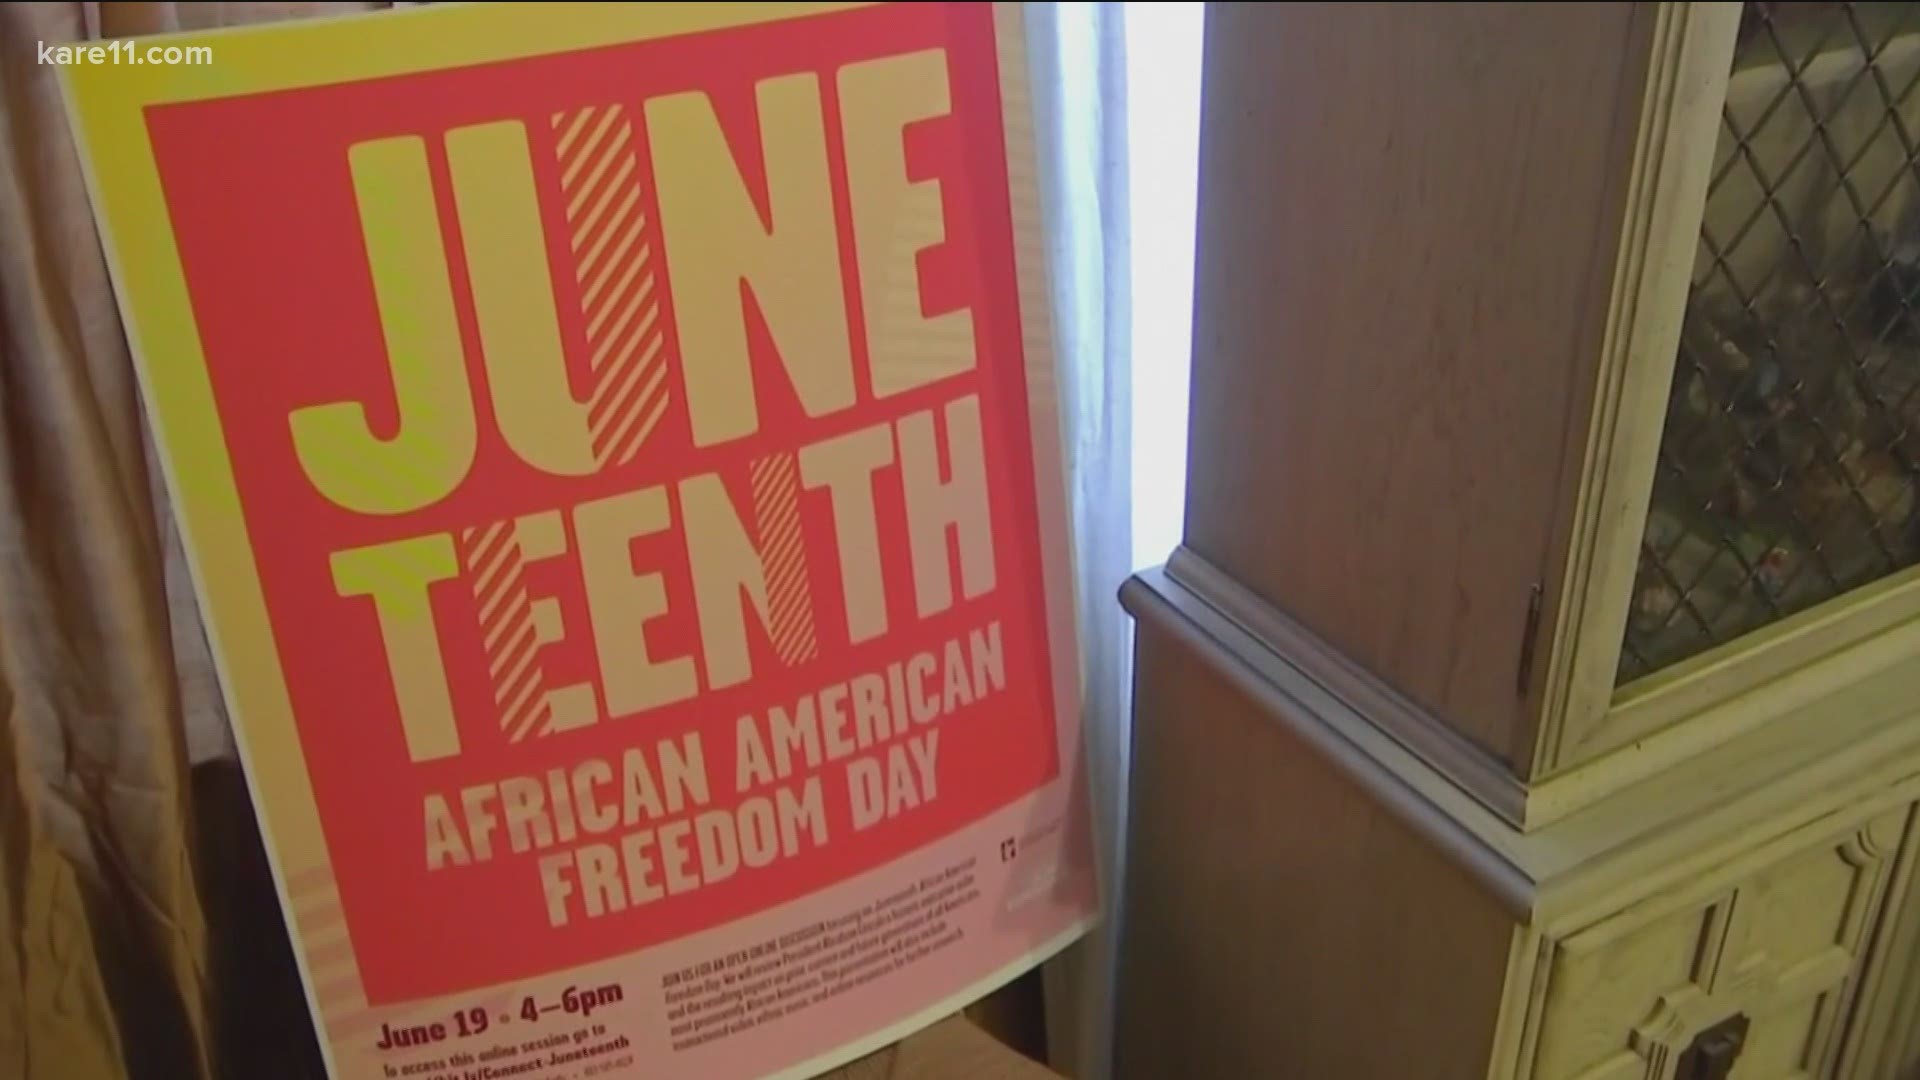 Juneteenth is the first new federal holiday since Martin Luther King Jr. Day was created in 1983.